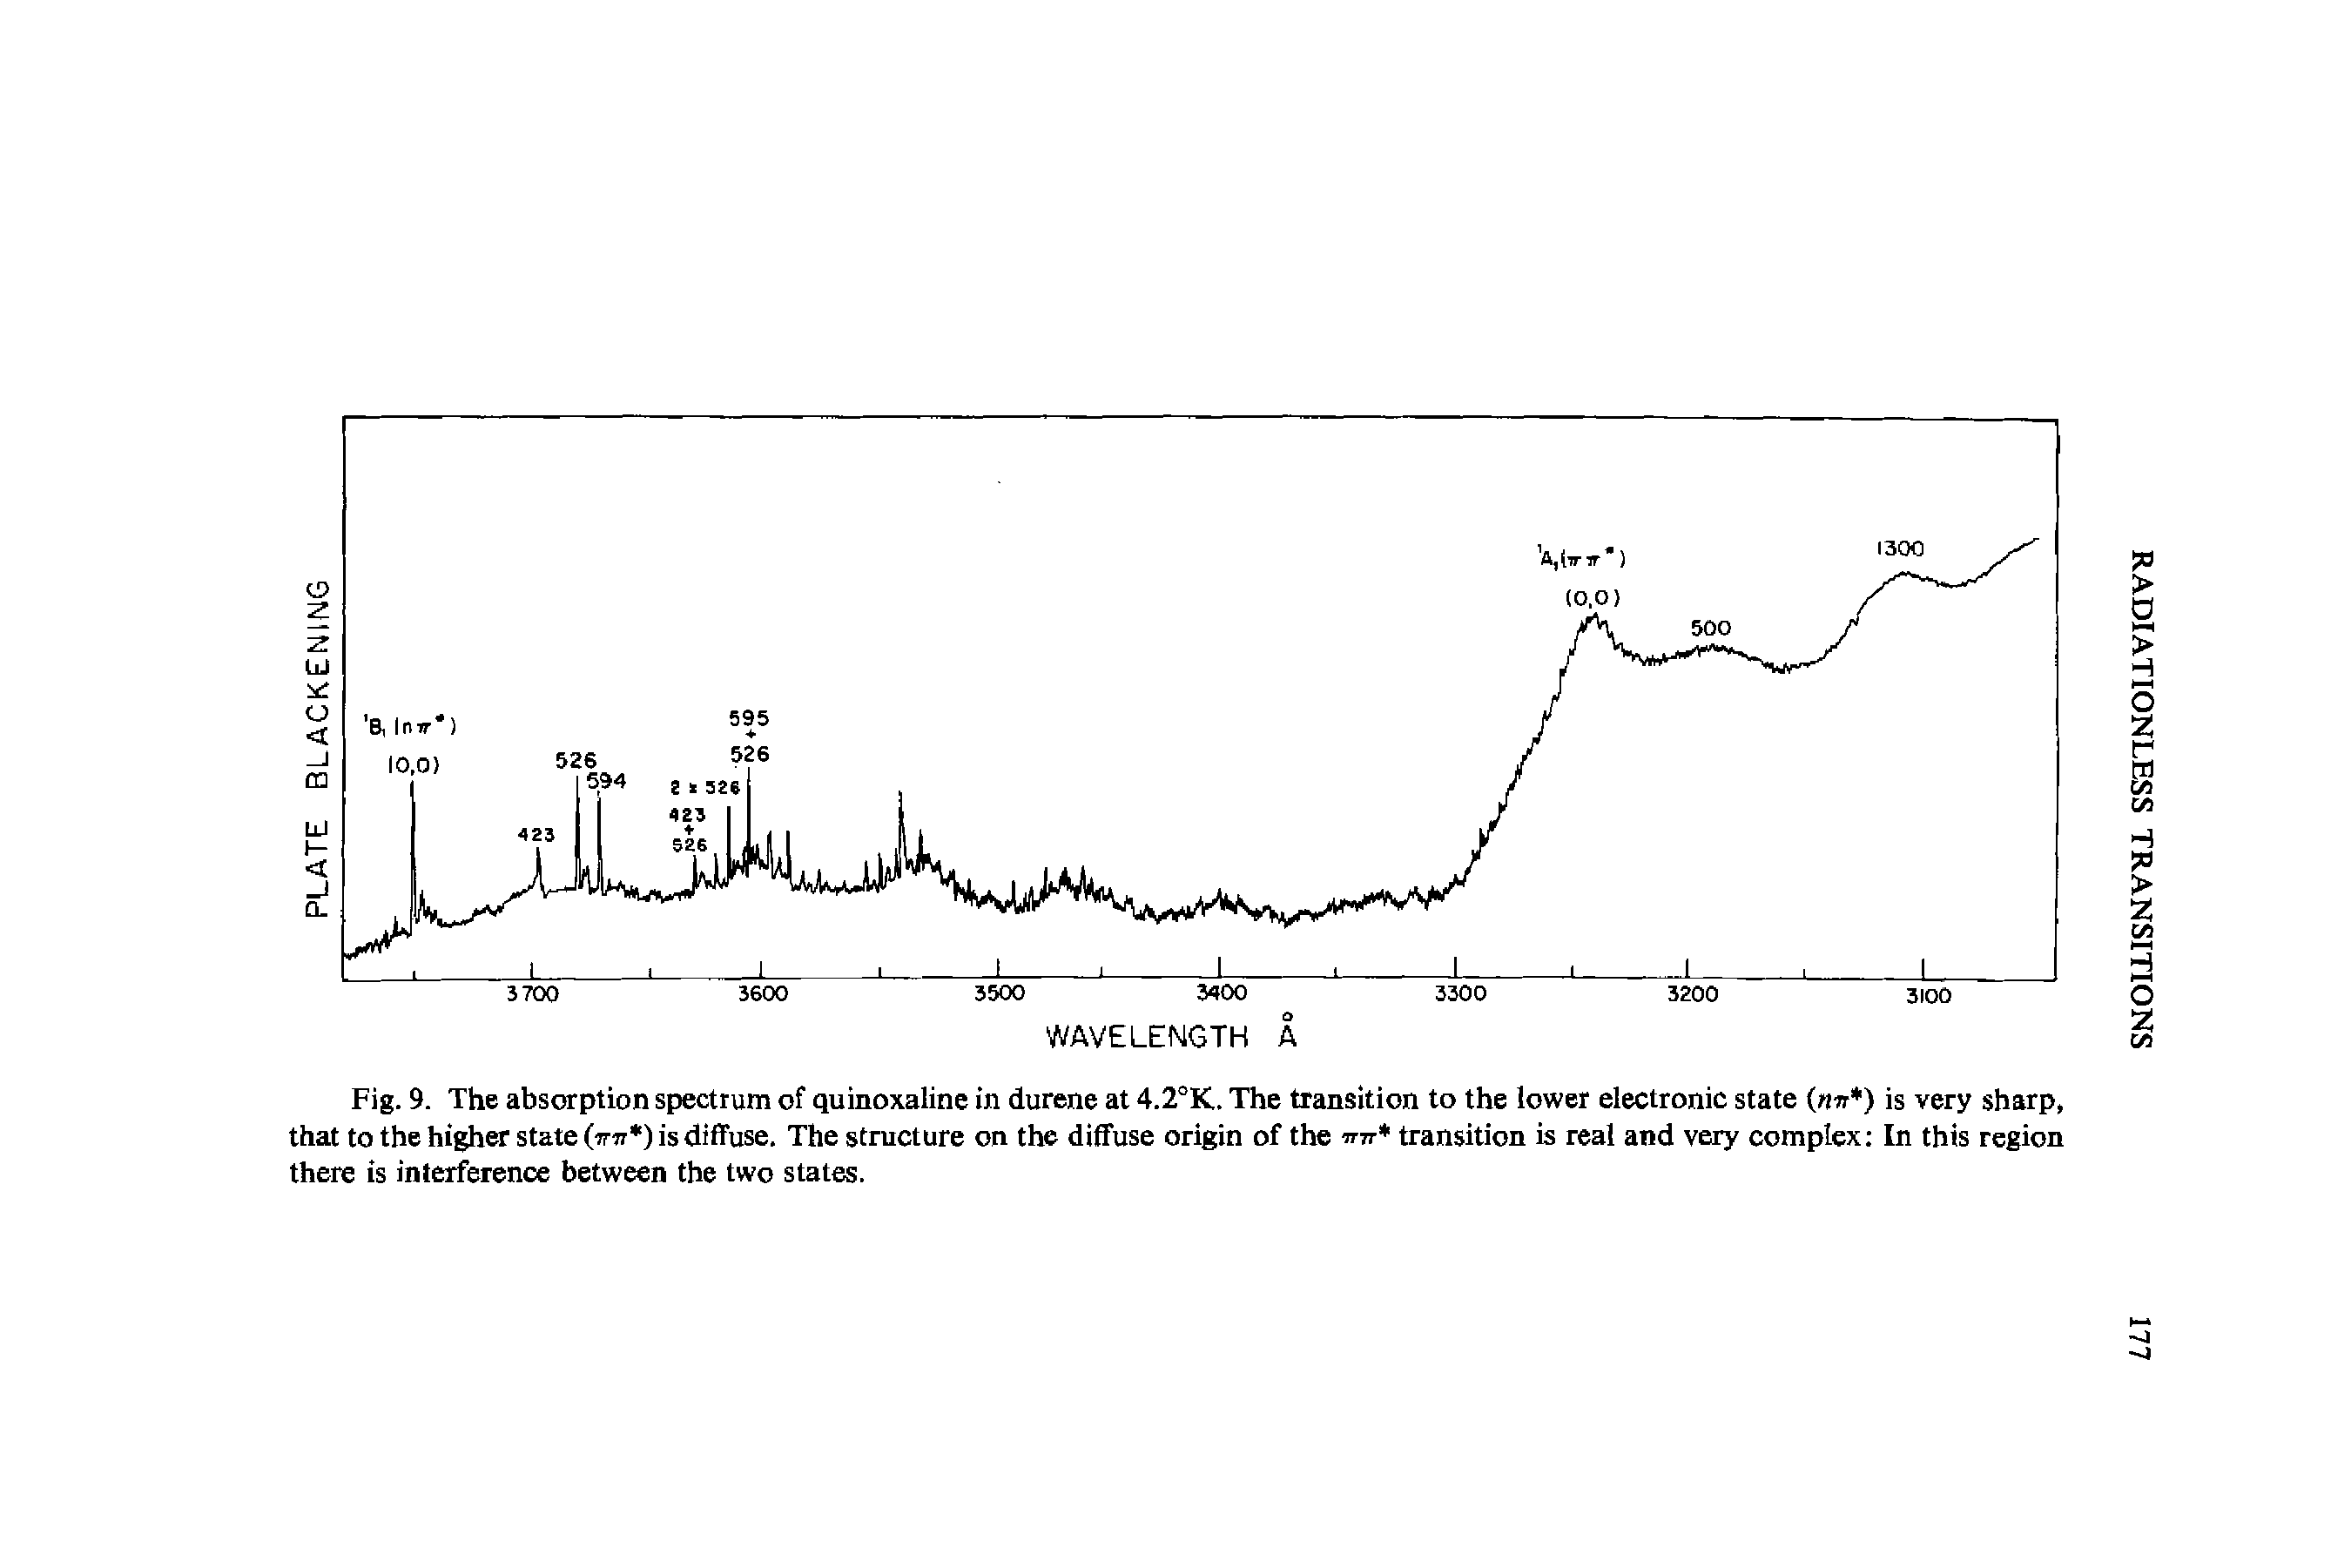 Fig. 9. The absorption spectrum of quinoxaline in durene at 4.2°K. The transition to the lower electronic state ( w ) is very sharp, that to the higher state (V77 ) is diffuse. The structure on the diffuse origin of the mr transition is real and very complex In this region there is interference between the two states.